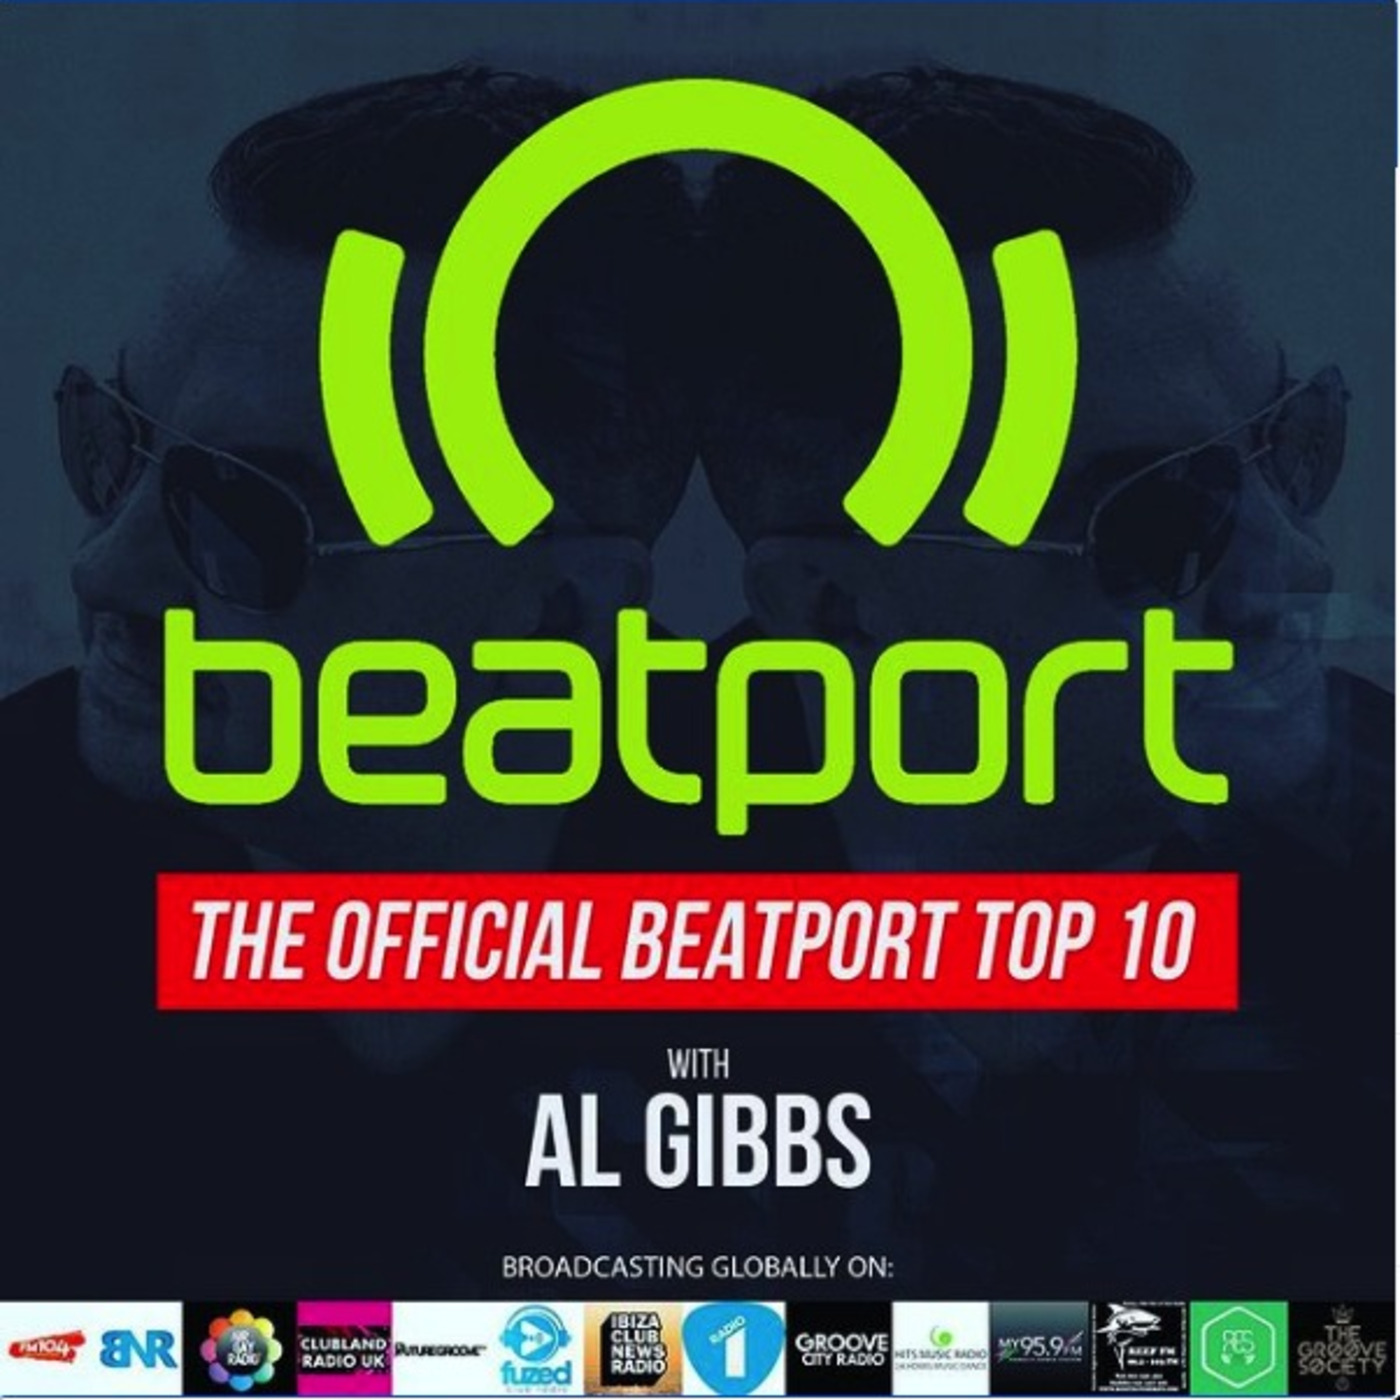 Episode 69: THE OFFICIAL BEATPORT TOP 10 WITH AL GIBBS (Week 17 2021)